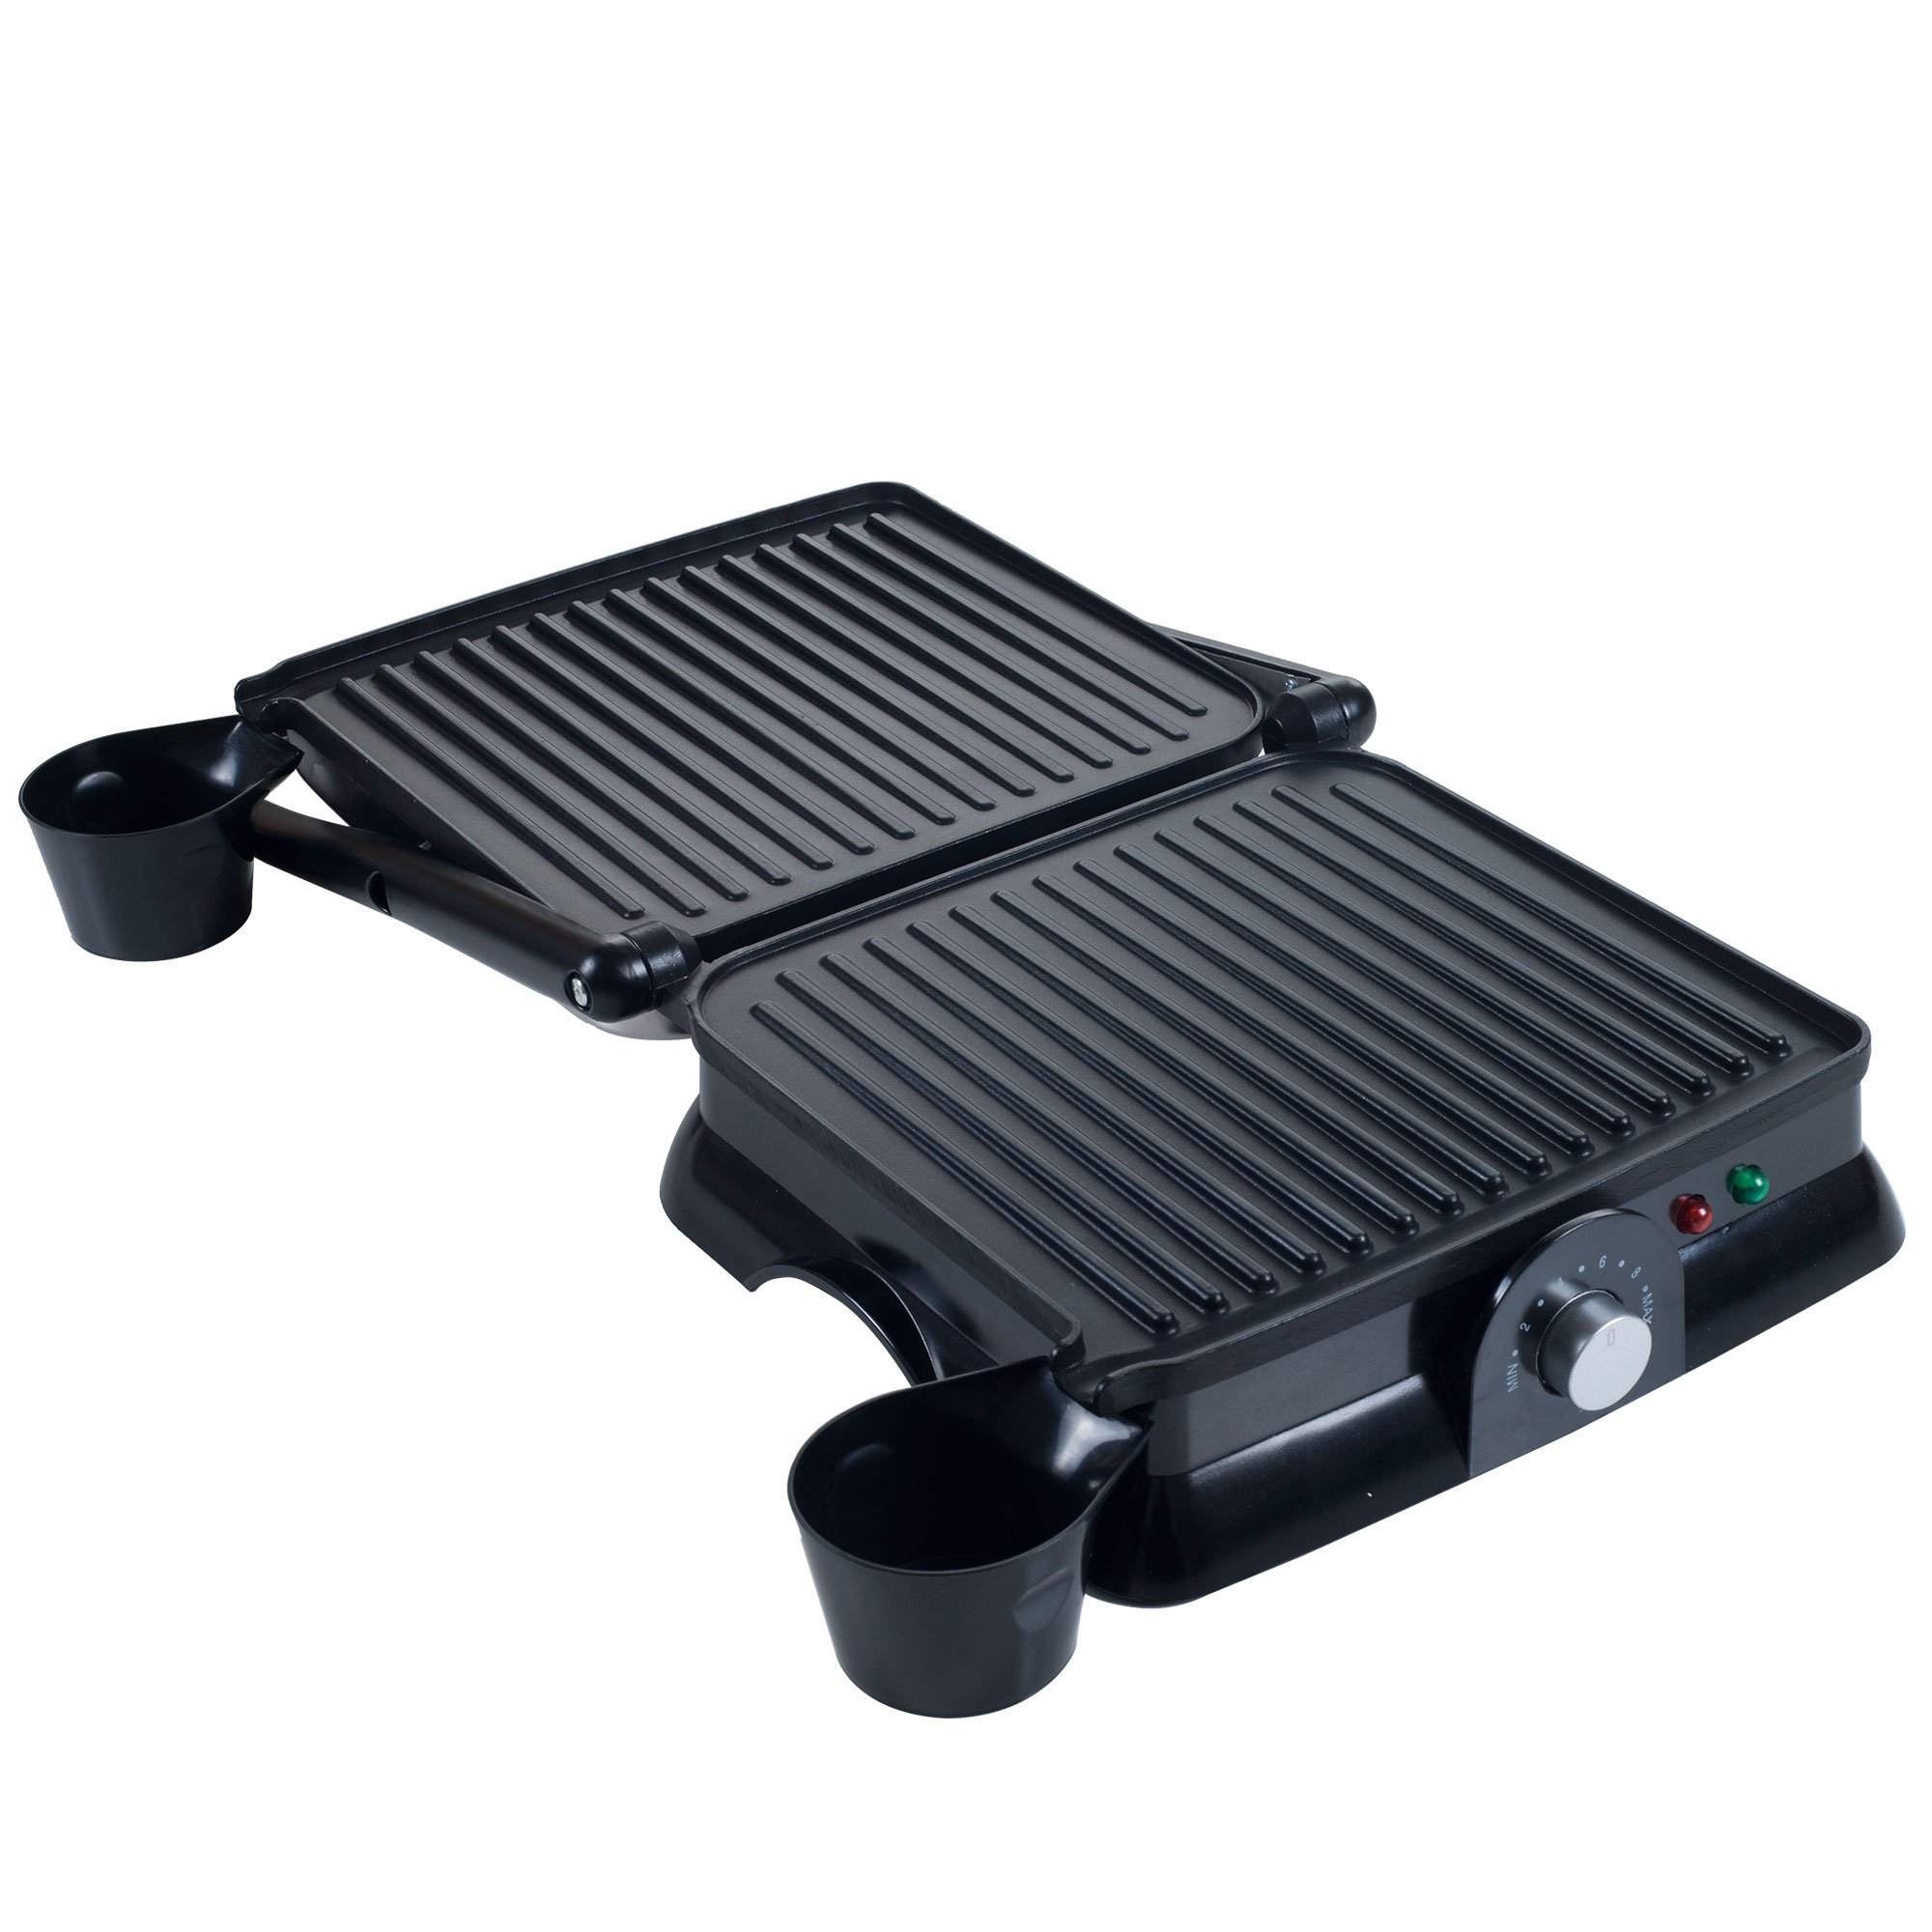 Chef Buddy Non-Stick Panini Press Indoor Grill and Gourmet Sandwich Maker, Electric with Nonstick Plates, 12.5”X 11" X 5”, Black